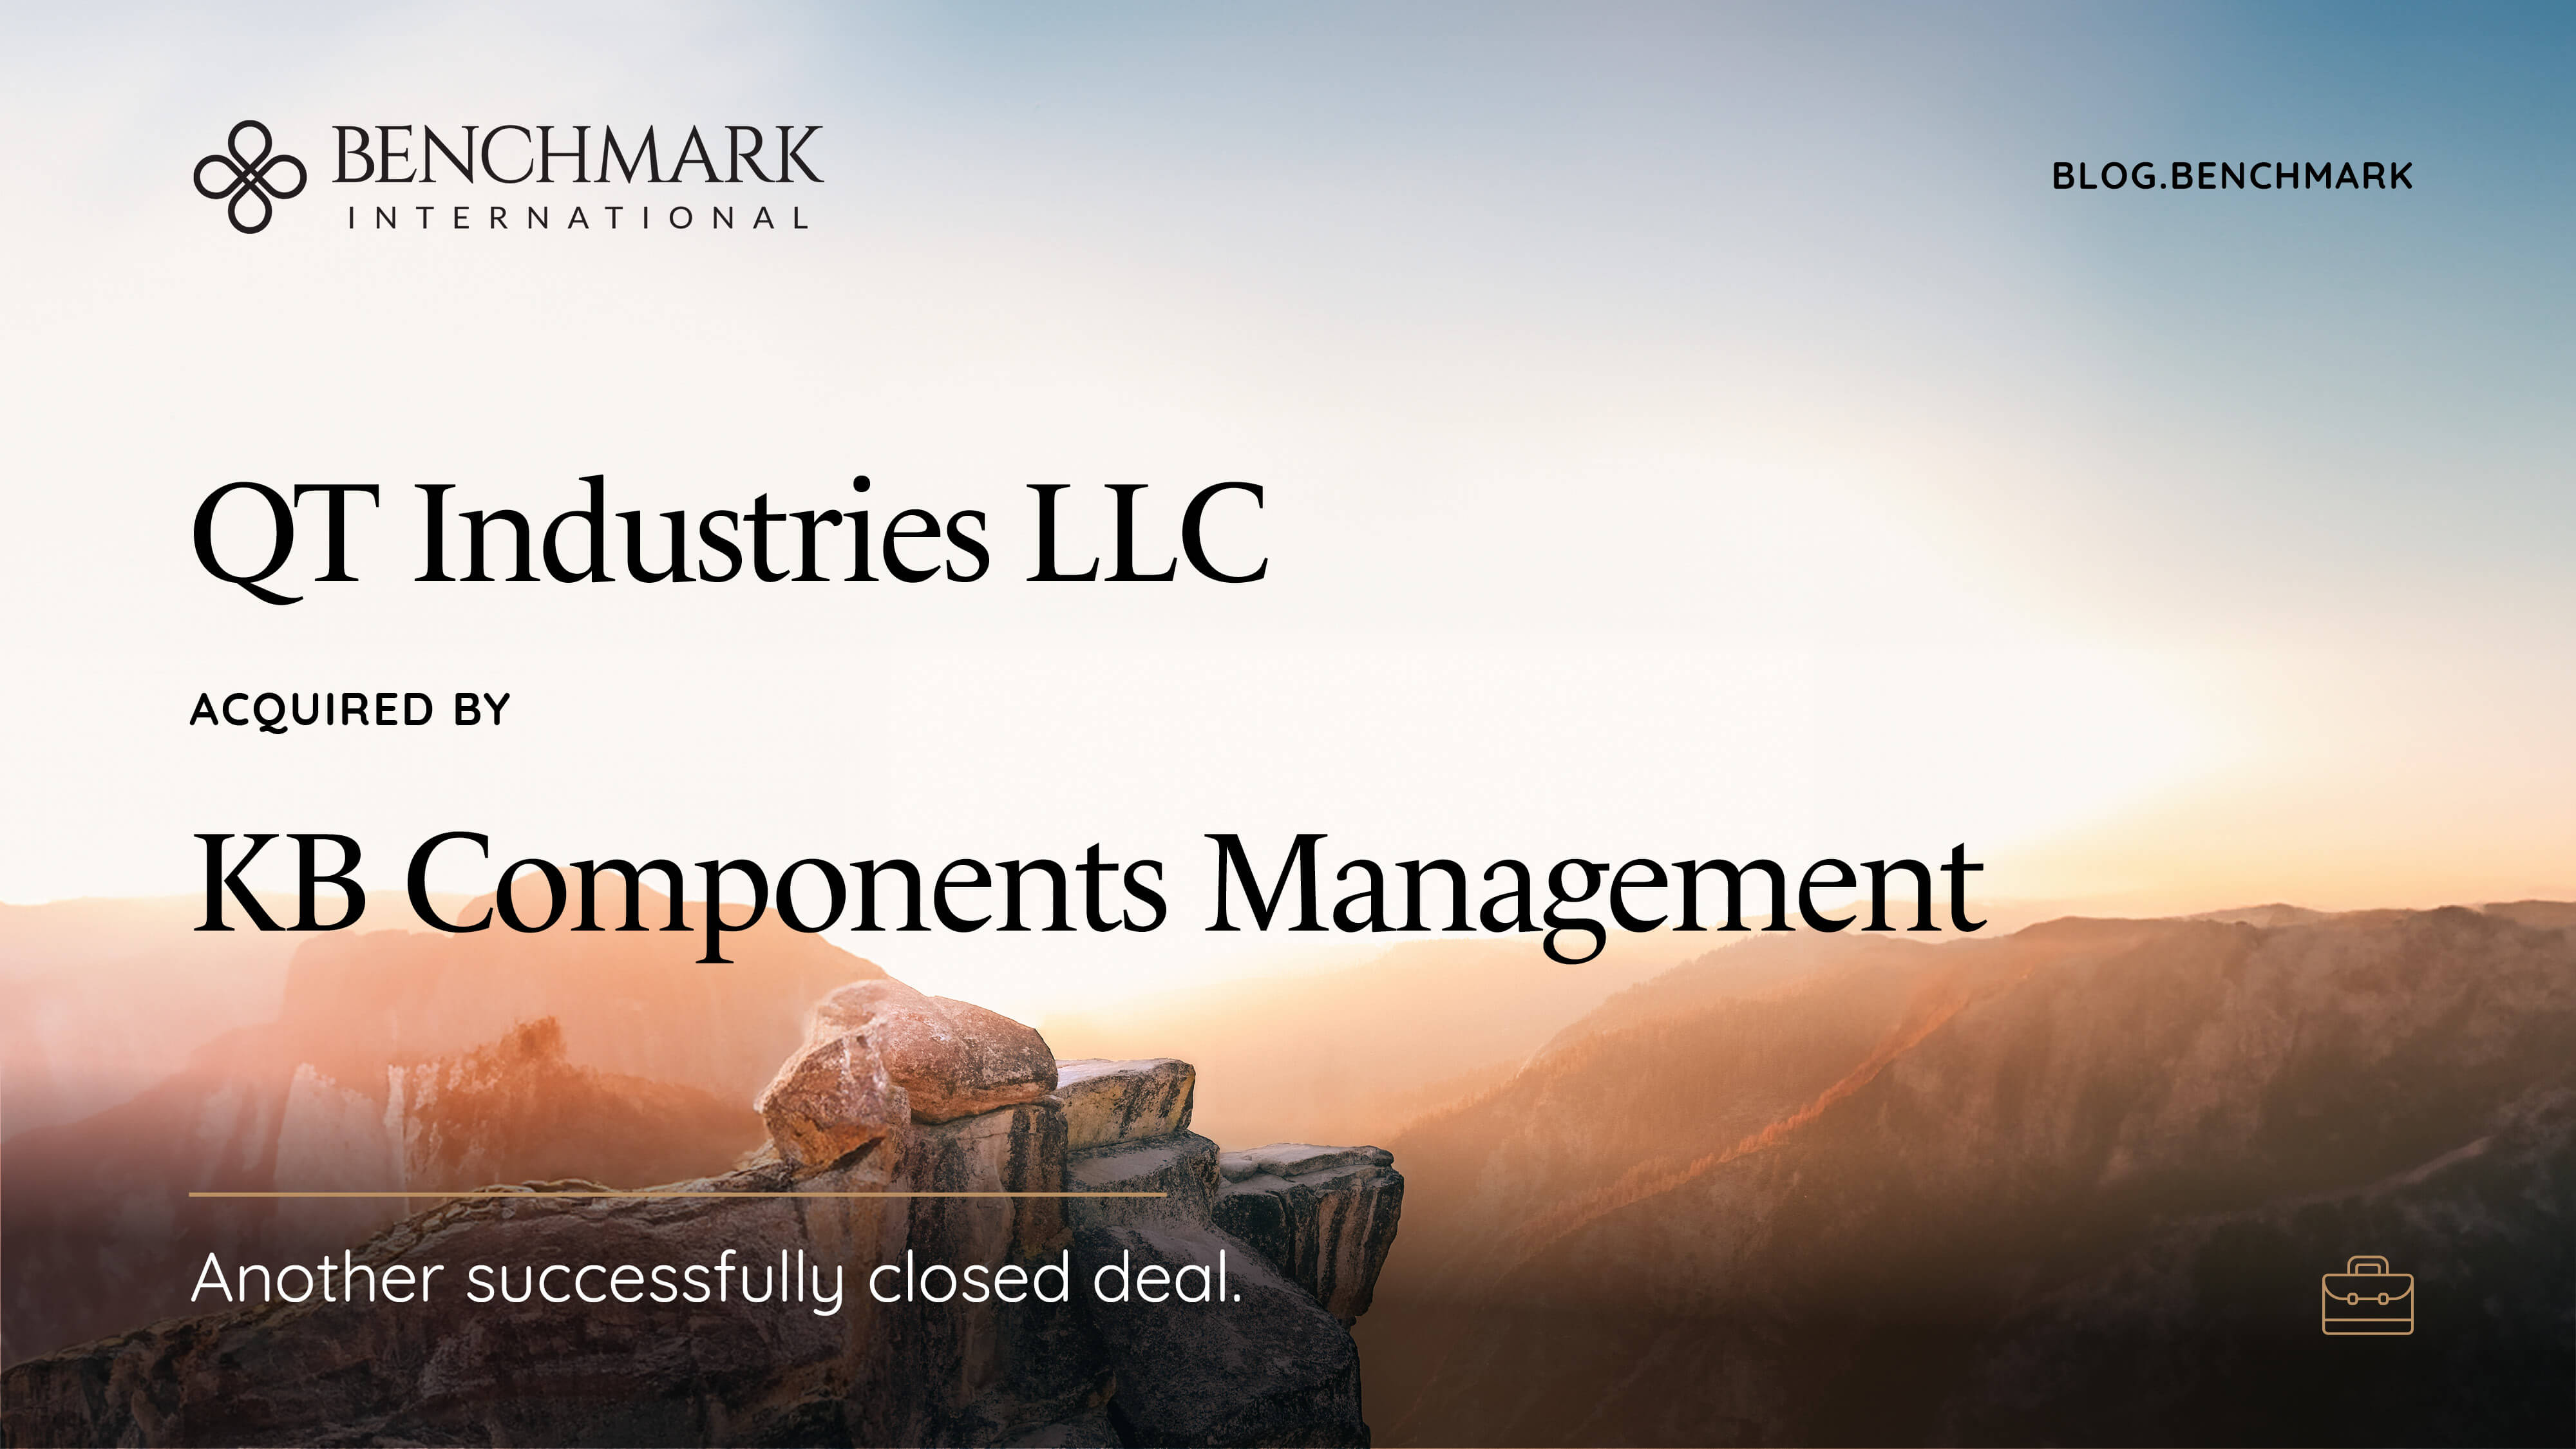 Benchmark International Successfully Facilitated The Transaction Between QT Industries, LLC (DBA QT Manufacturing) And KB Components